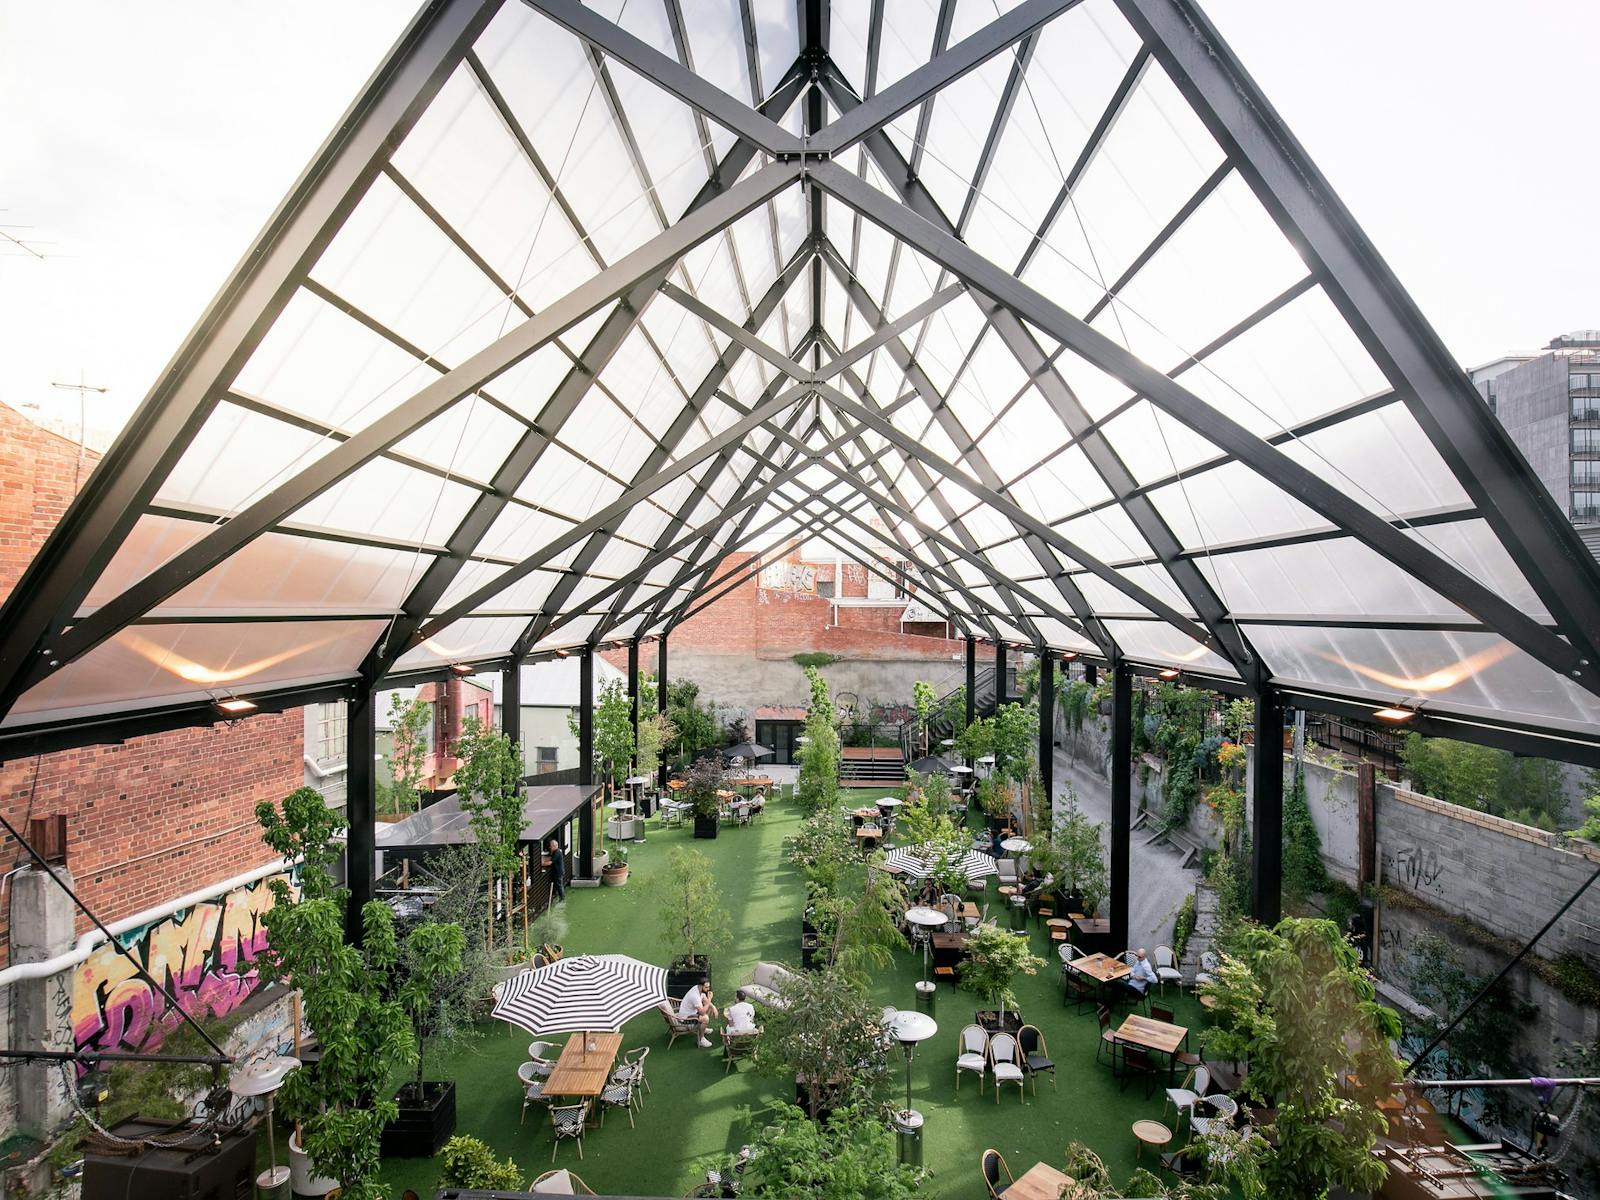 The 18 metre tall Cathedral black frame shelters the lawn space with tables and plants beneath